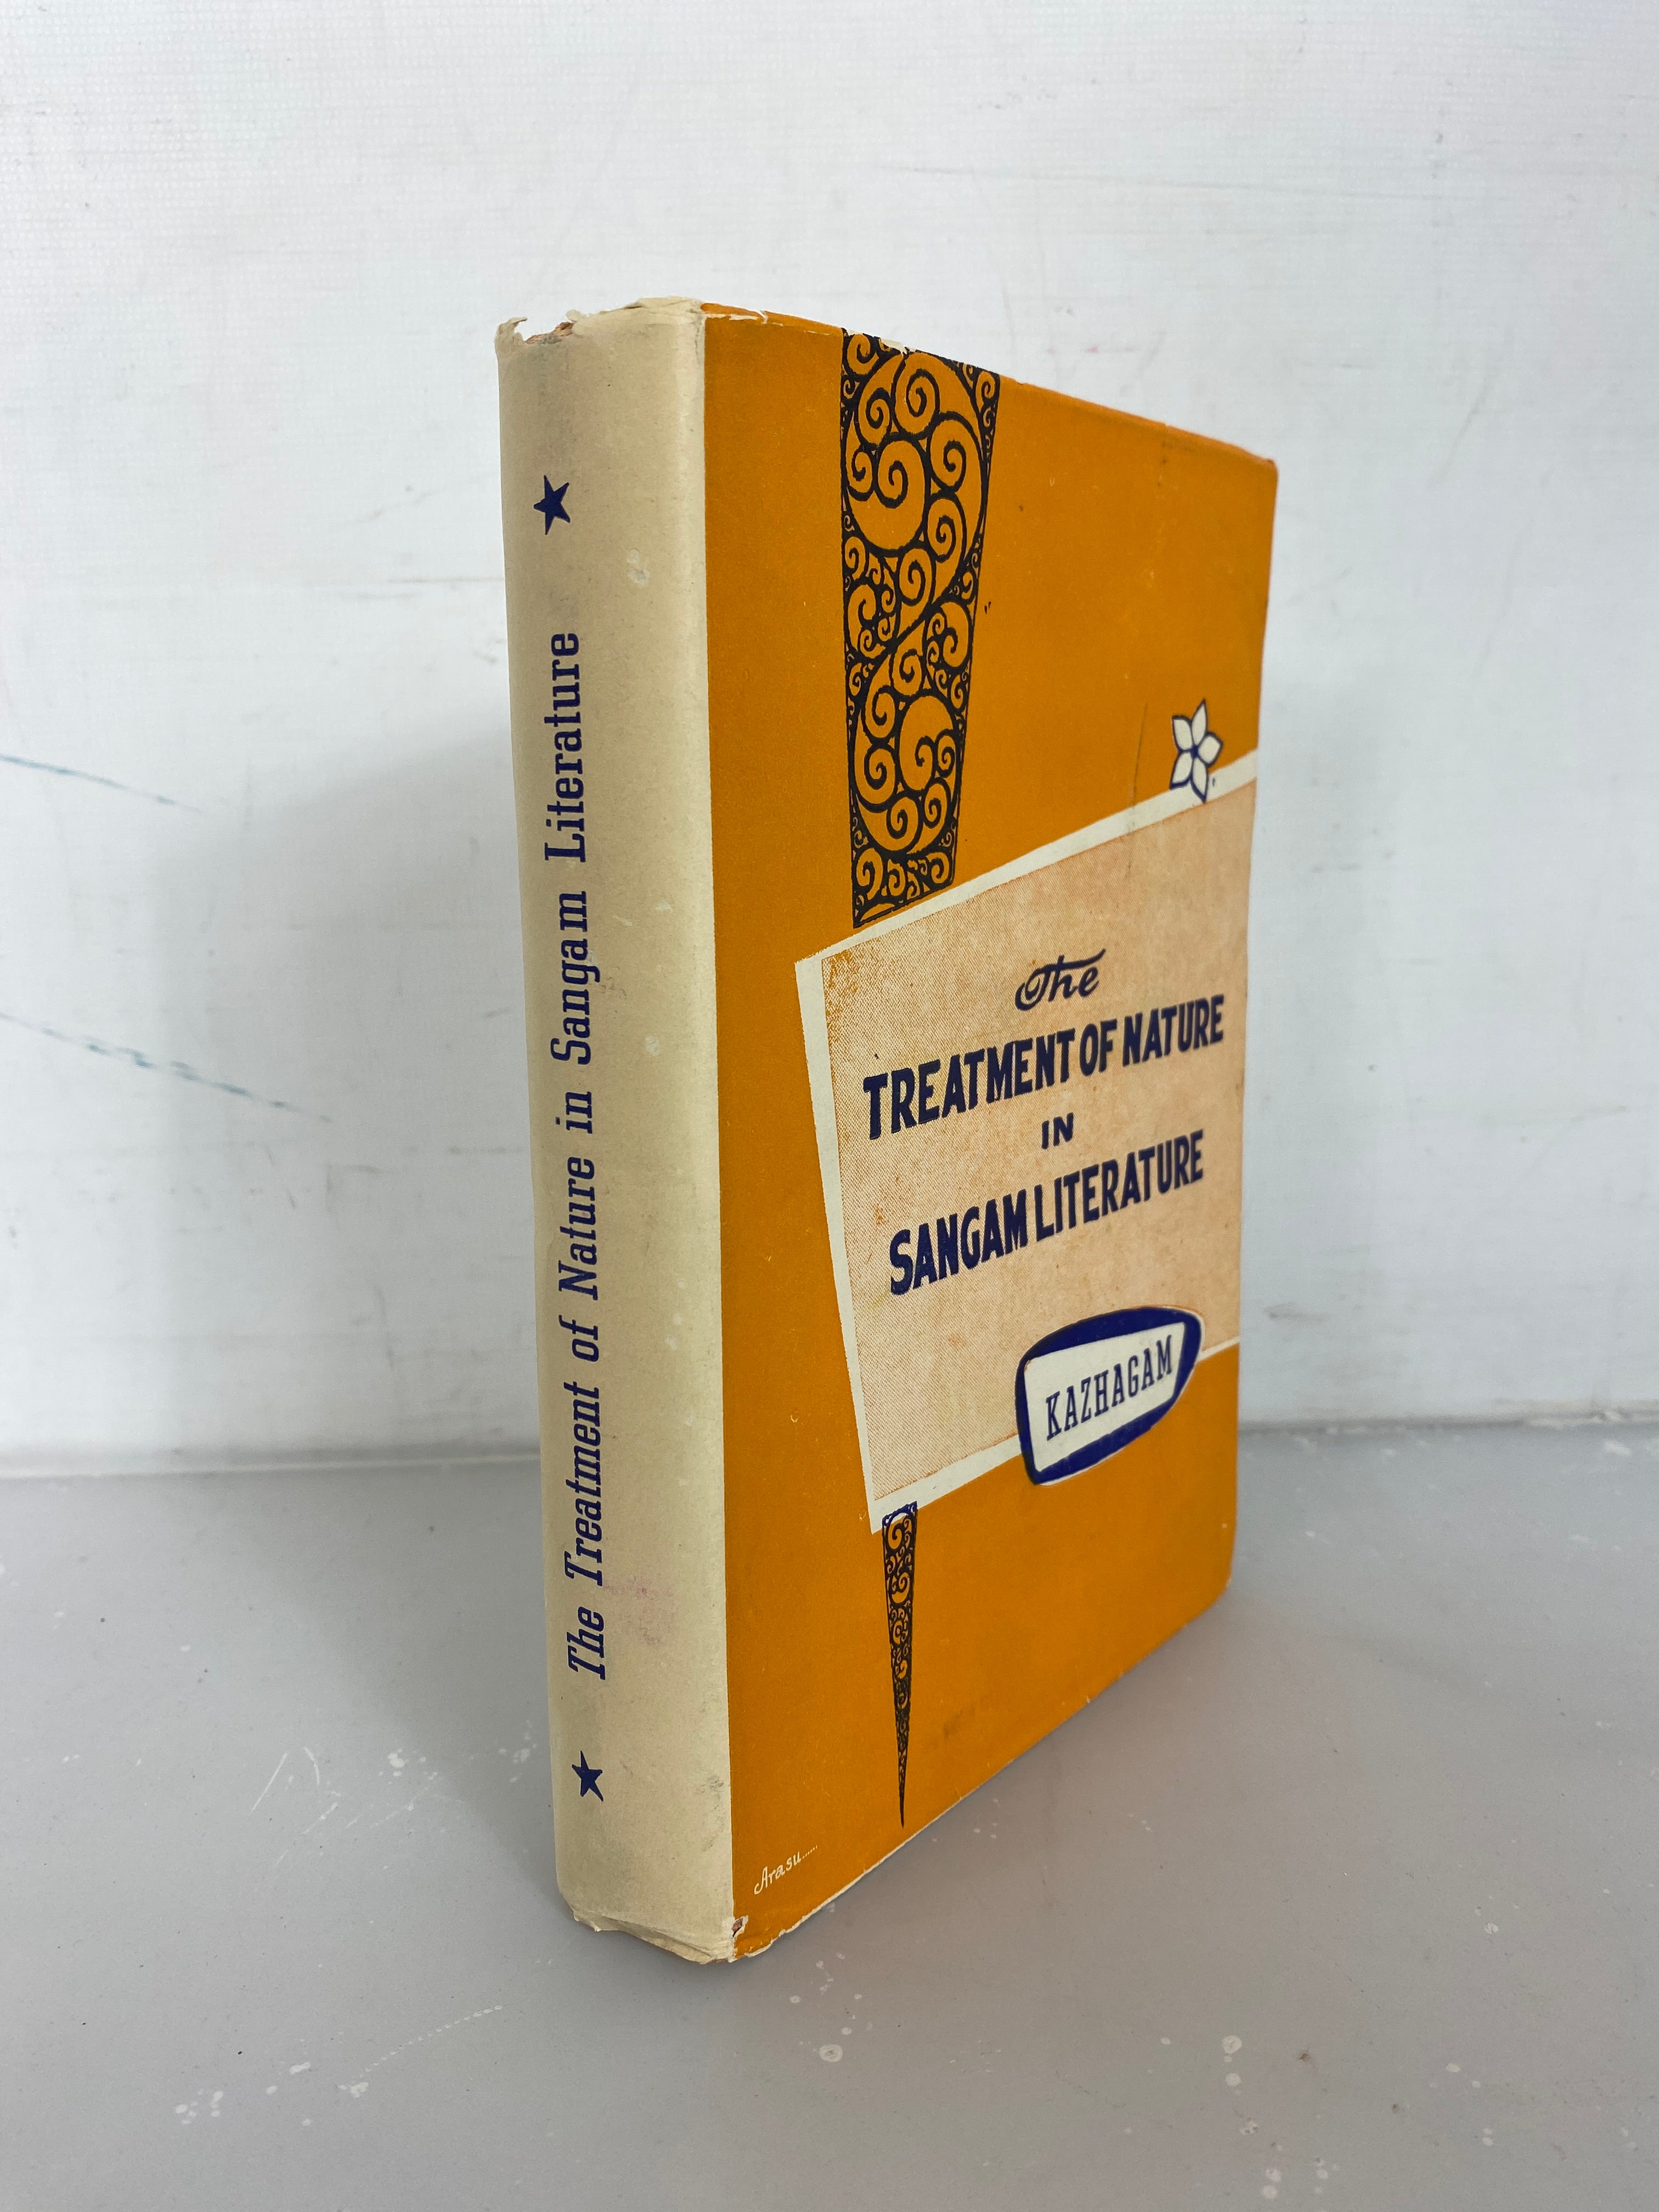 Lot of 3 Tamil Literature Books: The Treatment of Nature in Sangam Literature (1969) and The Golden Anthology of Ancient Tamil Literature Volumes II and III (1959-1960) HC DJ